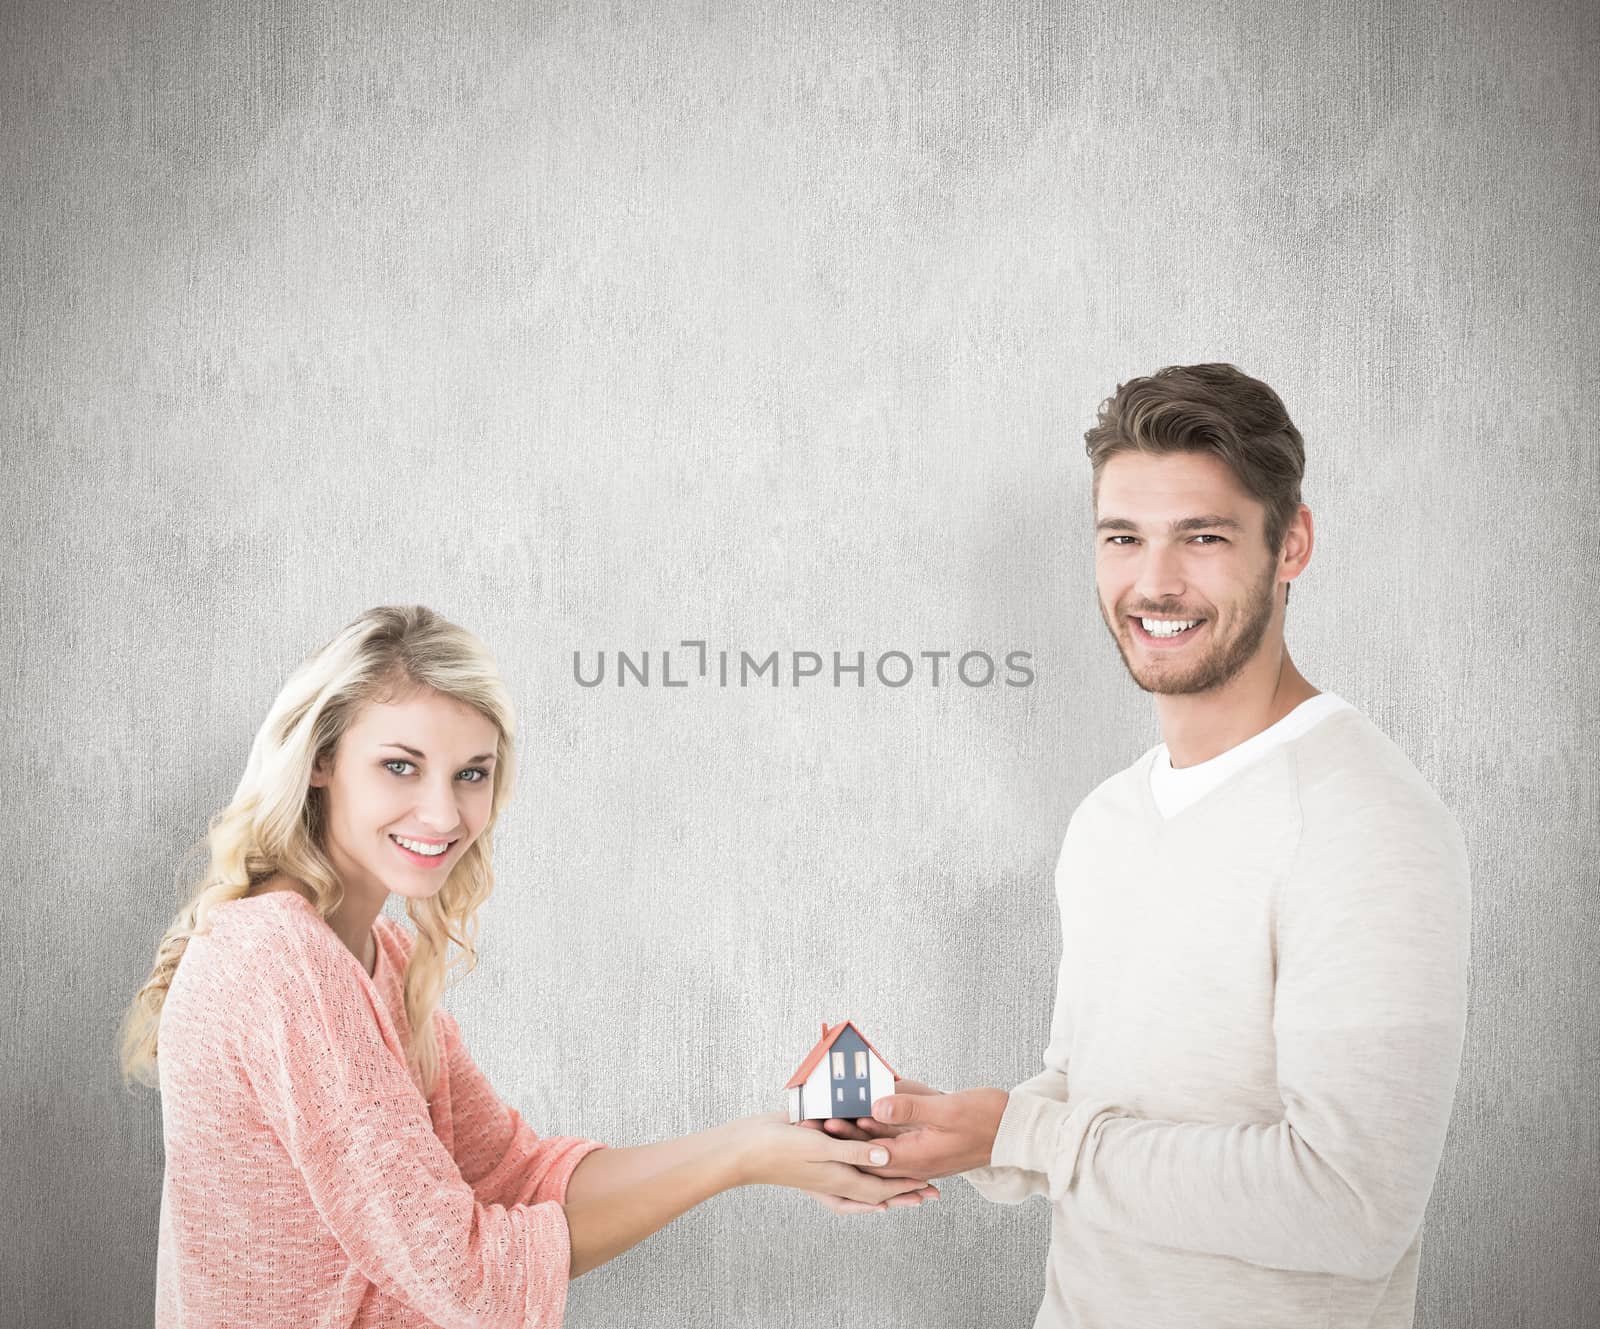 Composite image of attractive couple holding miniature house model by Wavebreakmedia